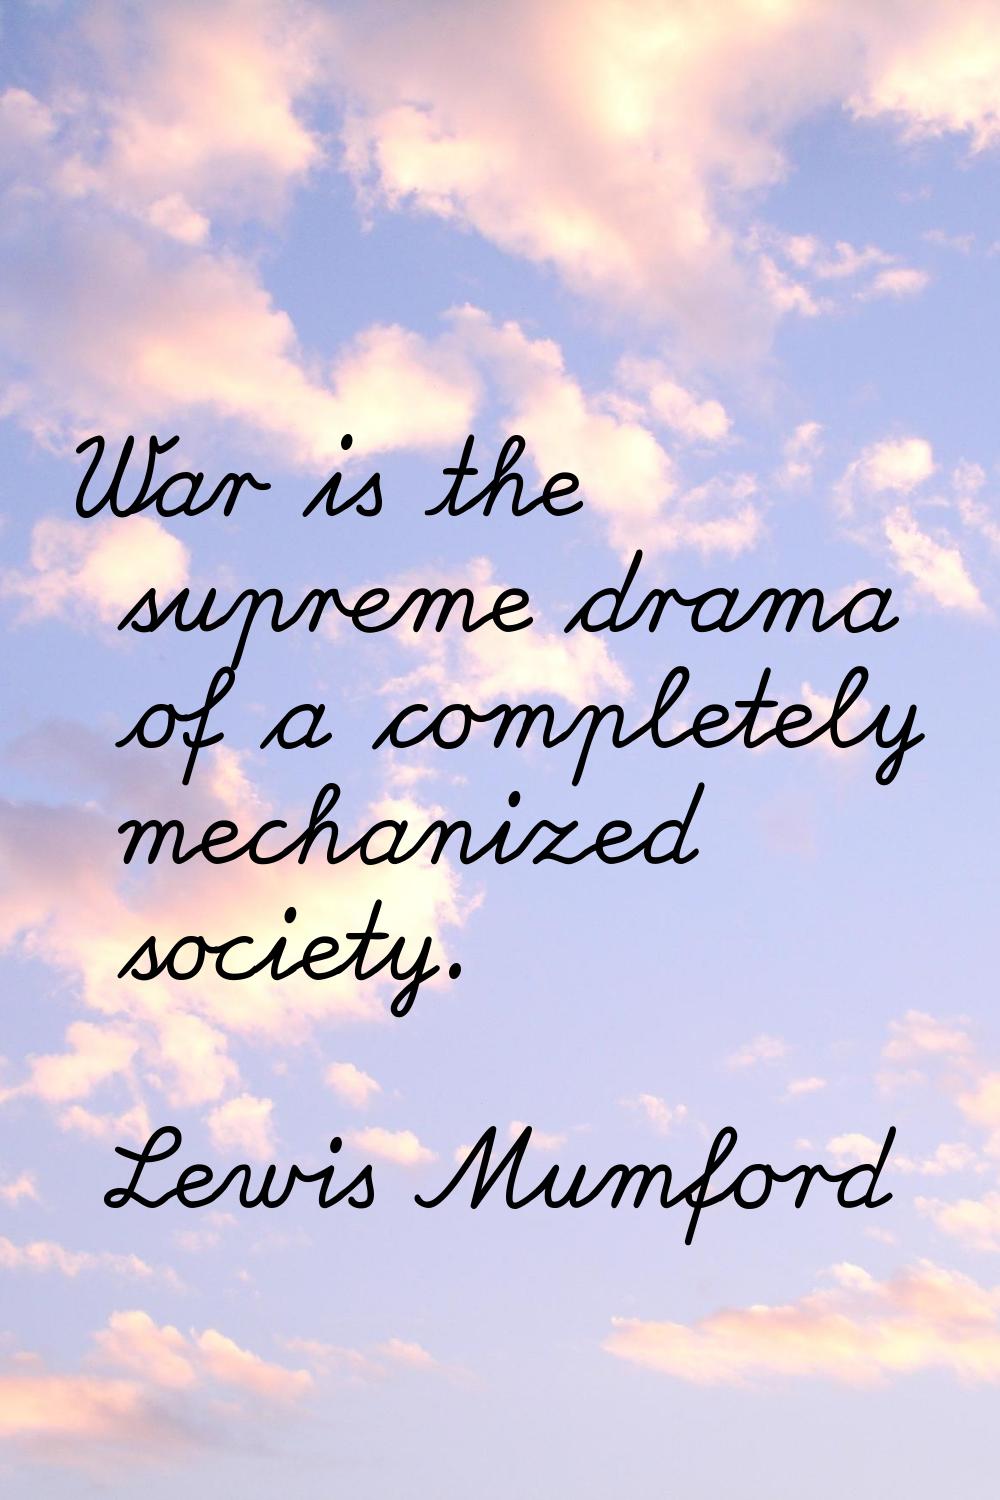 War is the supreme drama of a completely mechanized society.